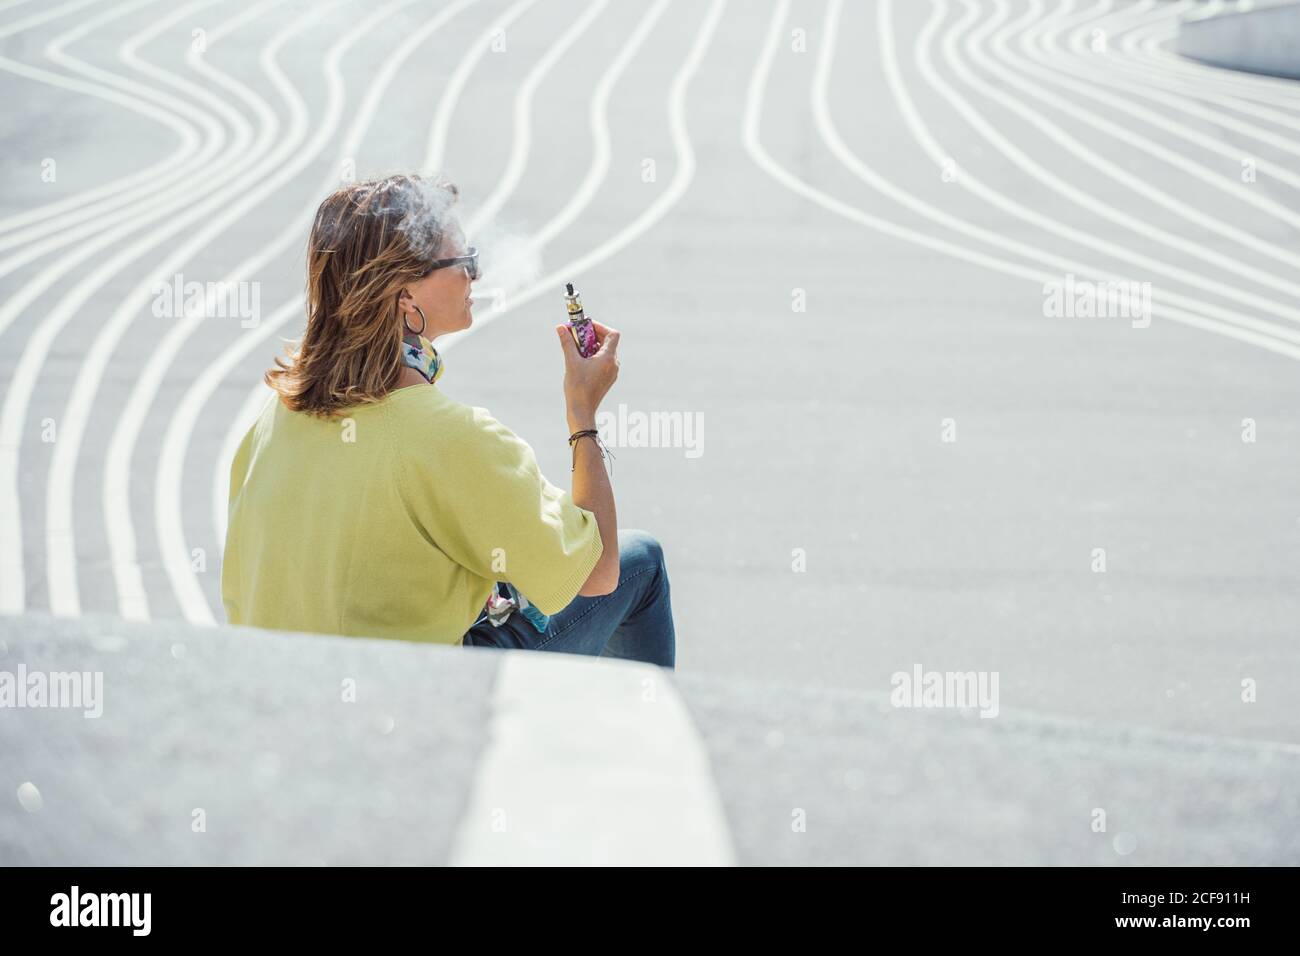 Side view of adult chilling Woman in sunglasses and colorful outfit exhaling steam while sitting on twisting asphalt road Stock Photo